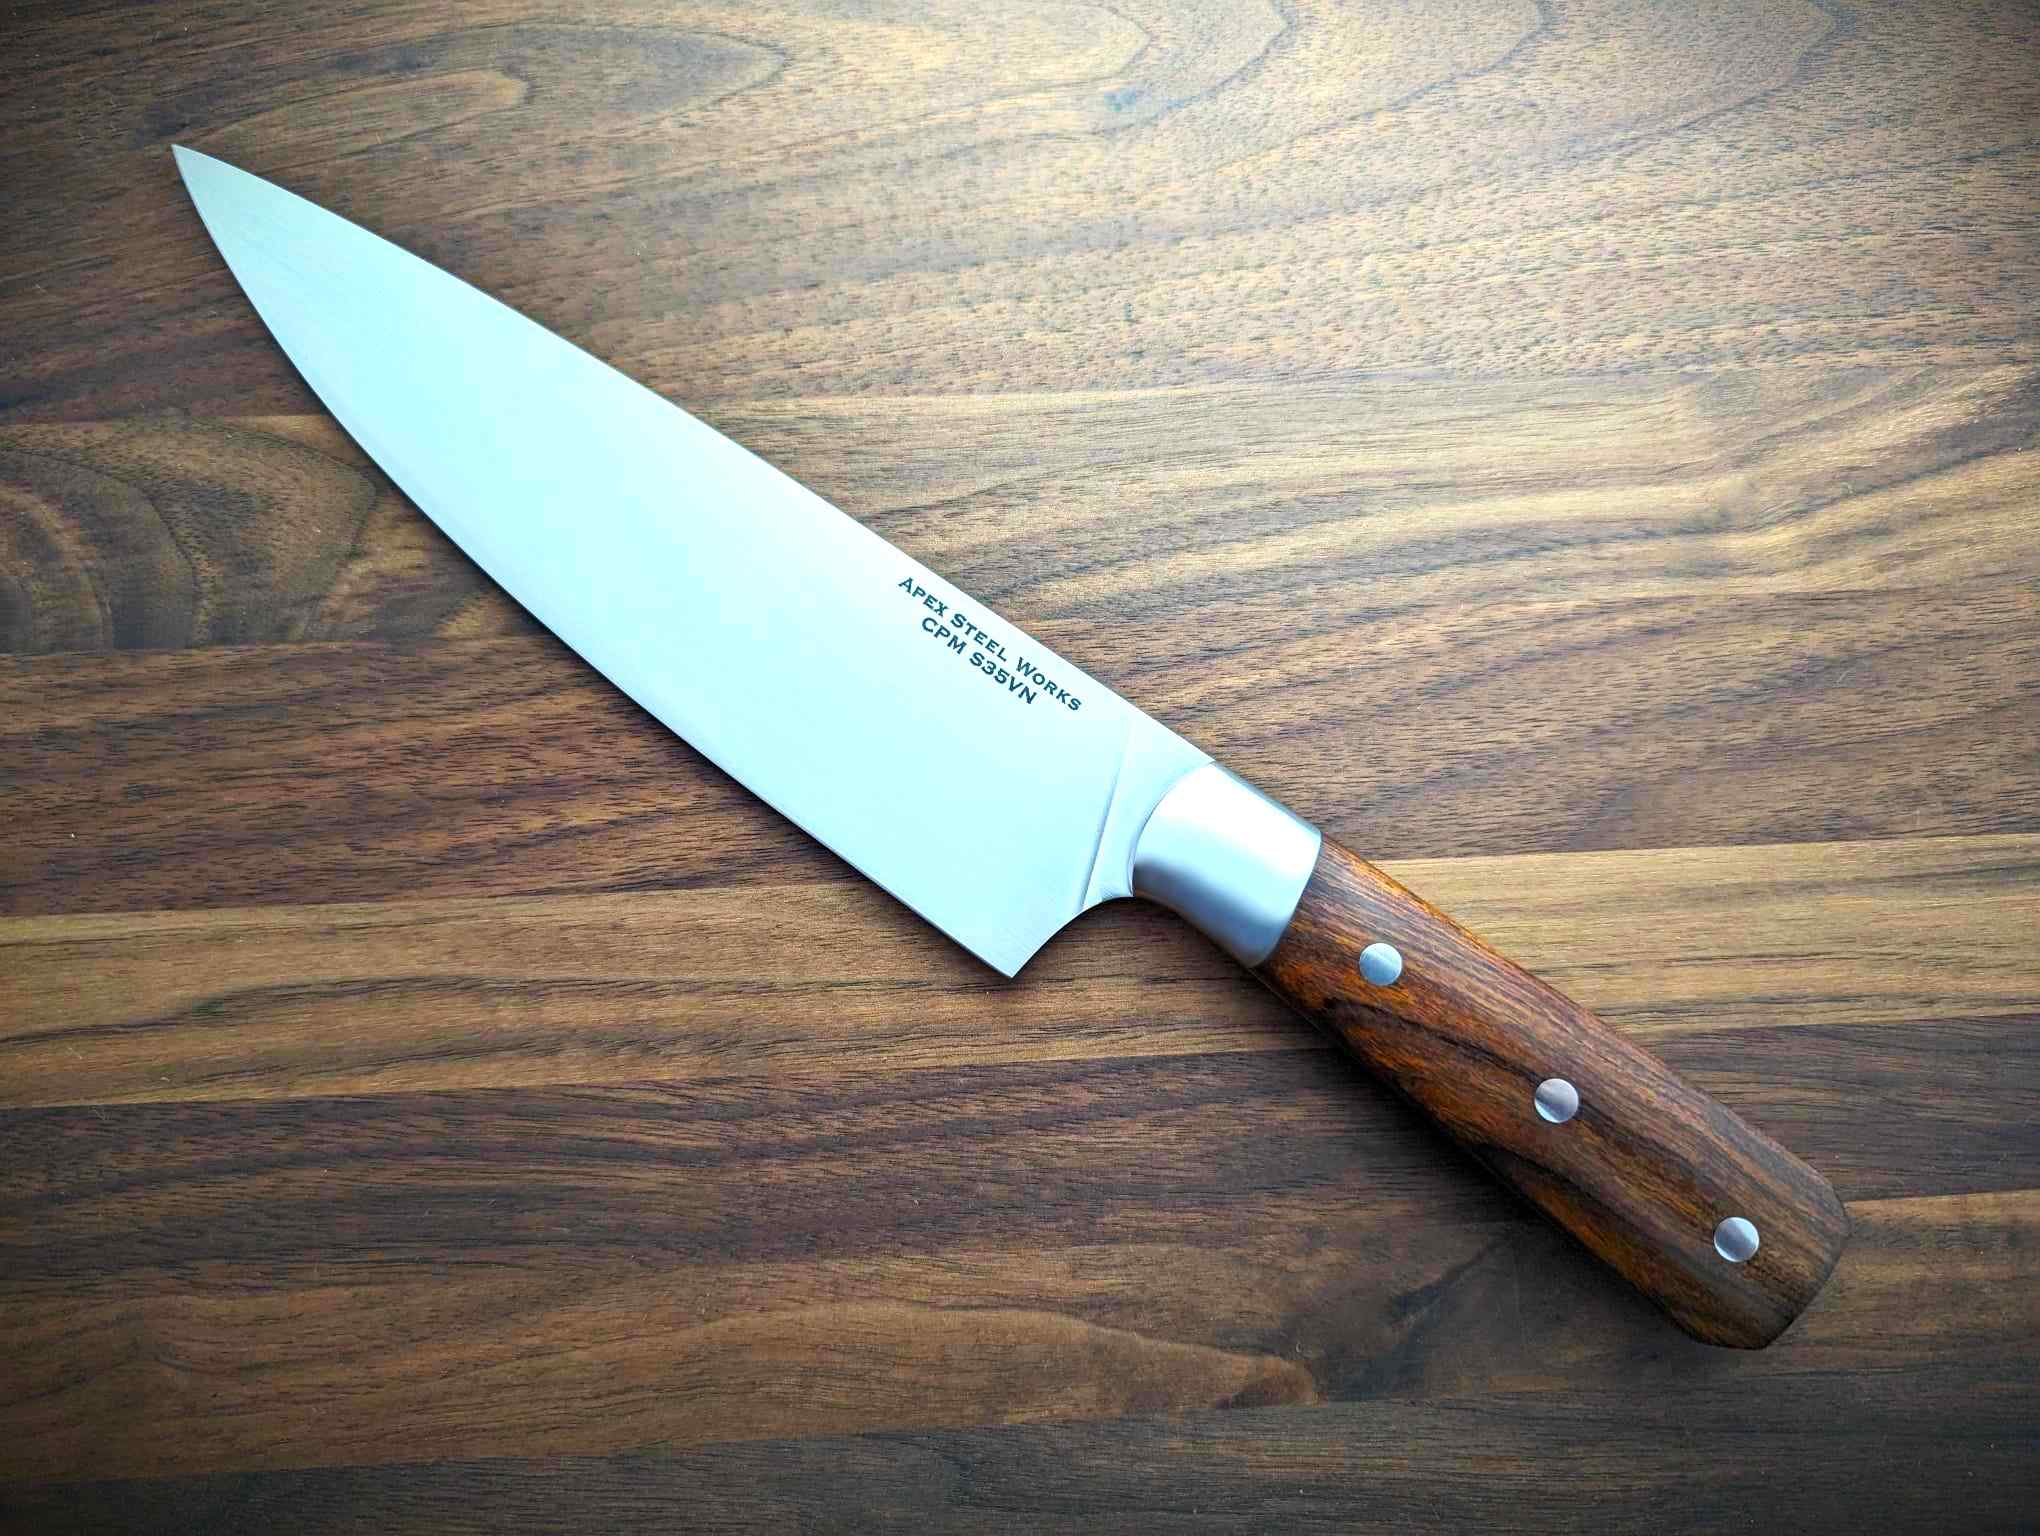 7 inch CPM S35VN chef's knife with black micarta handle and 304 stainless bolsters